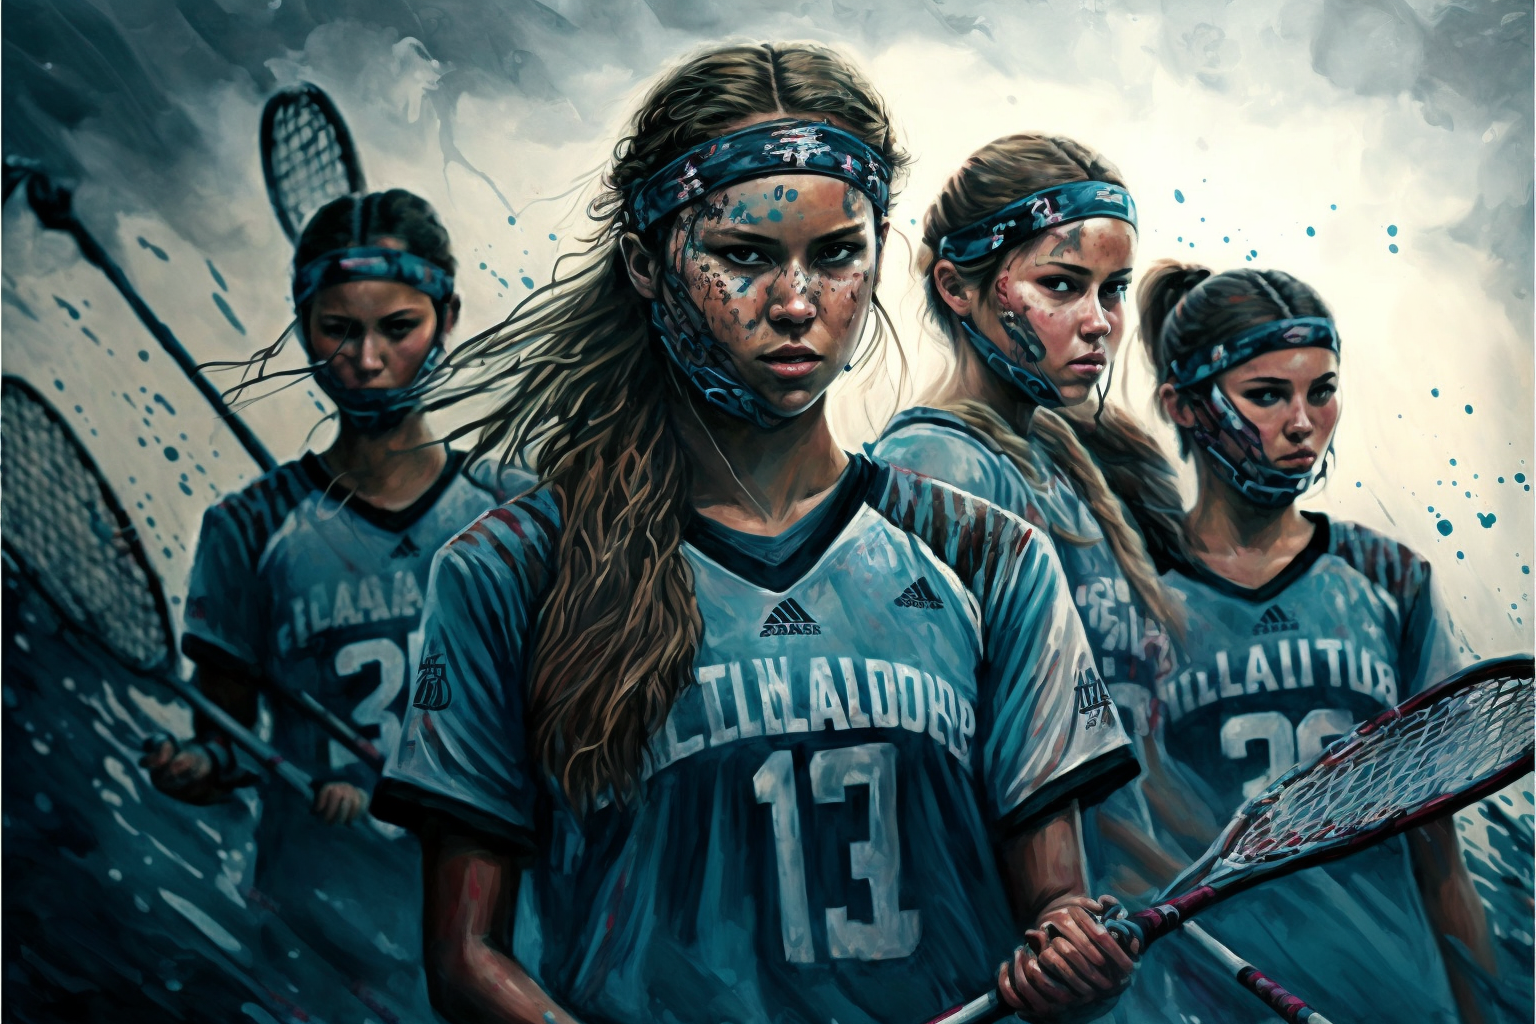 Remote.tools shares a list of lacrosse team name ideas for women